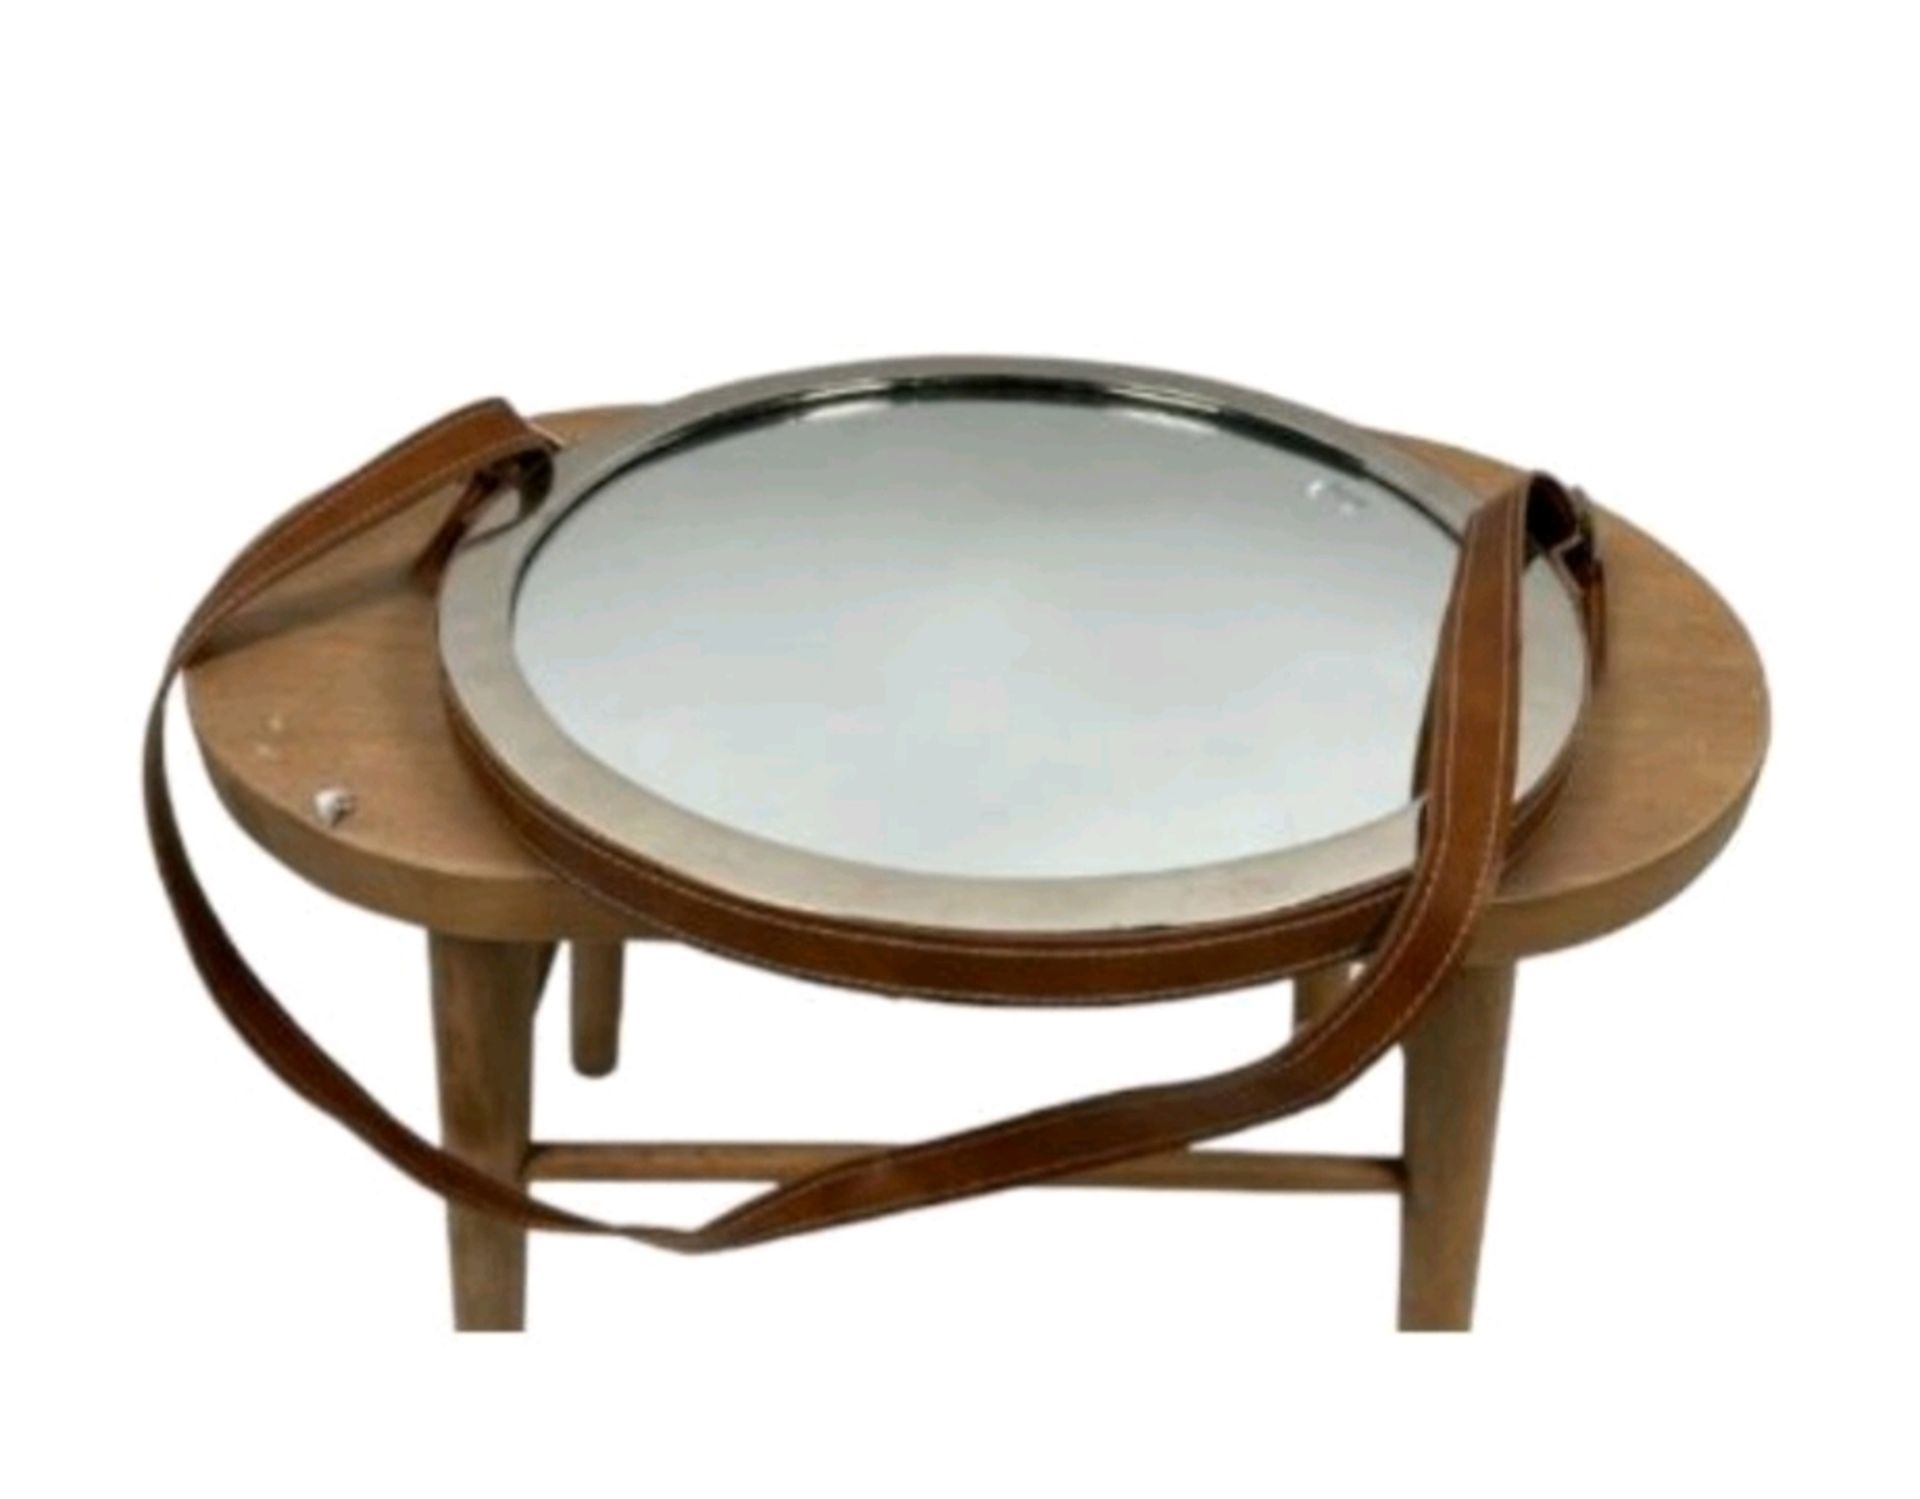 Circular Wall Mirror With Leather Strap